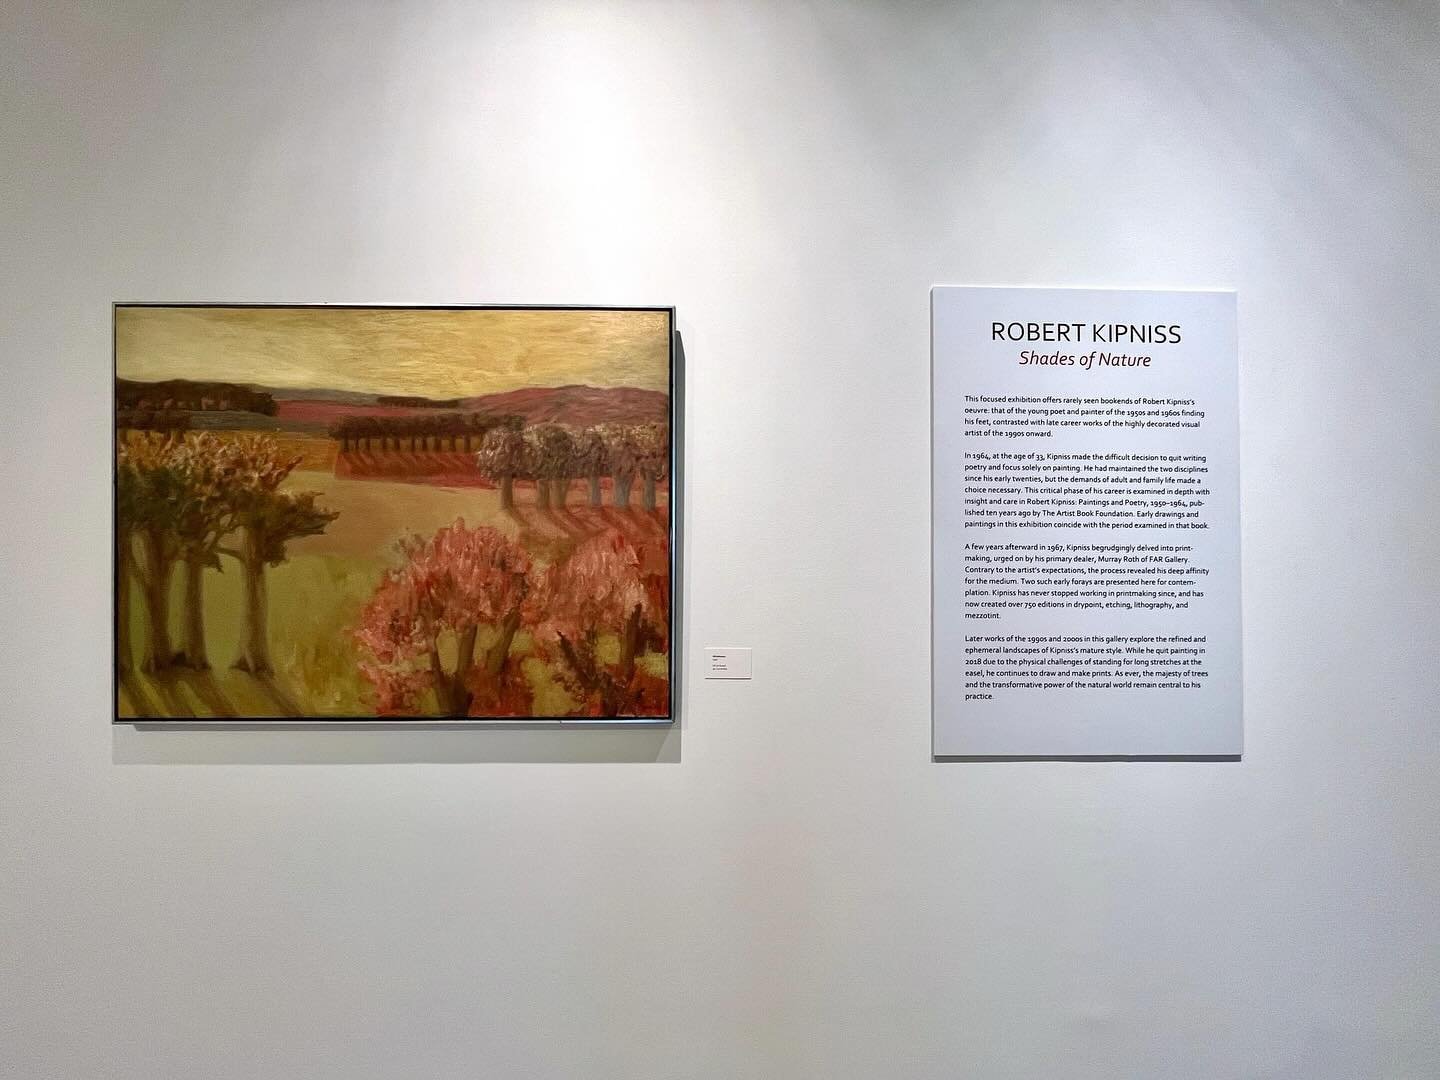 Before Poetry Month comes to a close, join us in celebrating the beauty of Robert Kipniss&rsquo; art and timeless poems showcased on our gallery walls! 

The exhibition, &ldquo;Robert Kipniss: Shades of Nature&rdquo;, curated last year in celebration